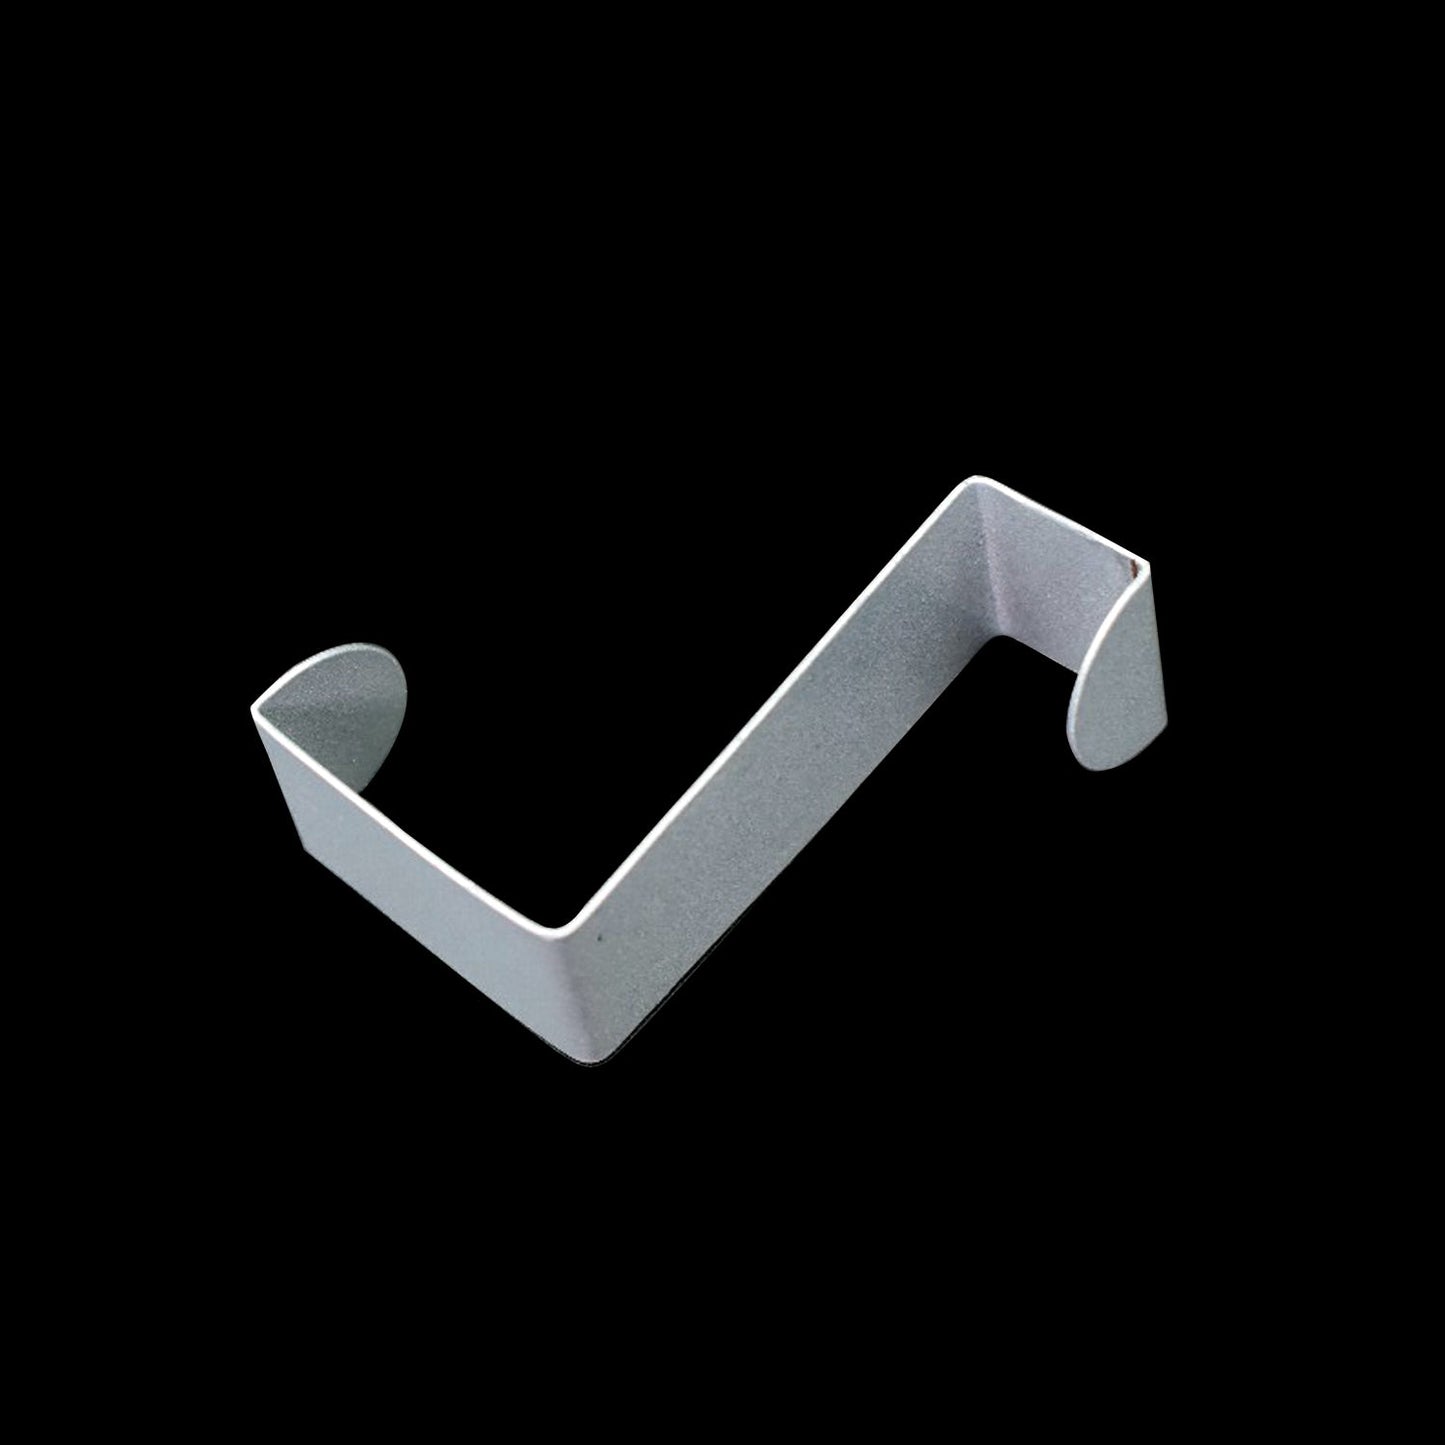 9027 1 Pc Z Shape Door Over Hook used widely in all kinds of household for hanging of cloths and fabric items etc. DeoDap